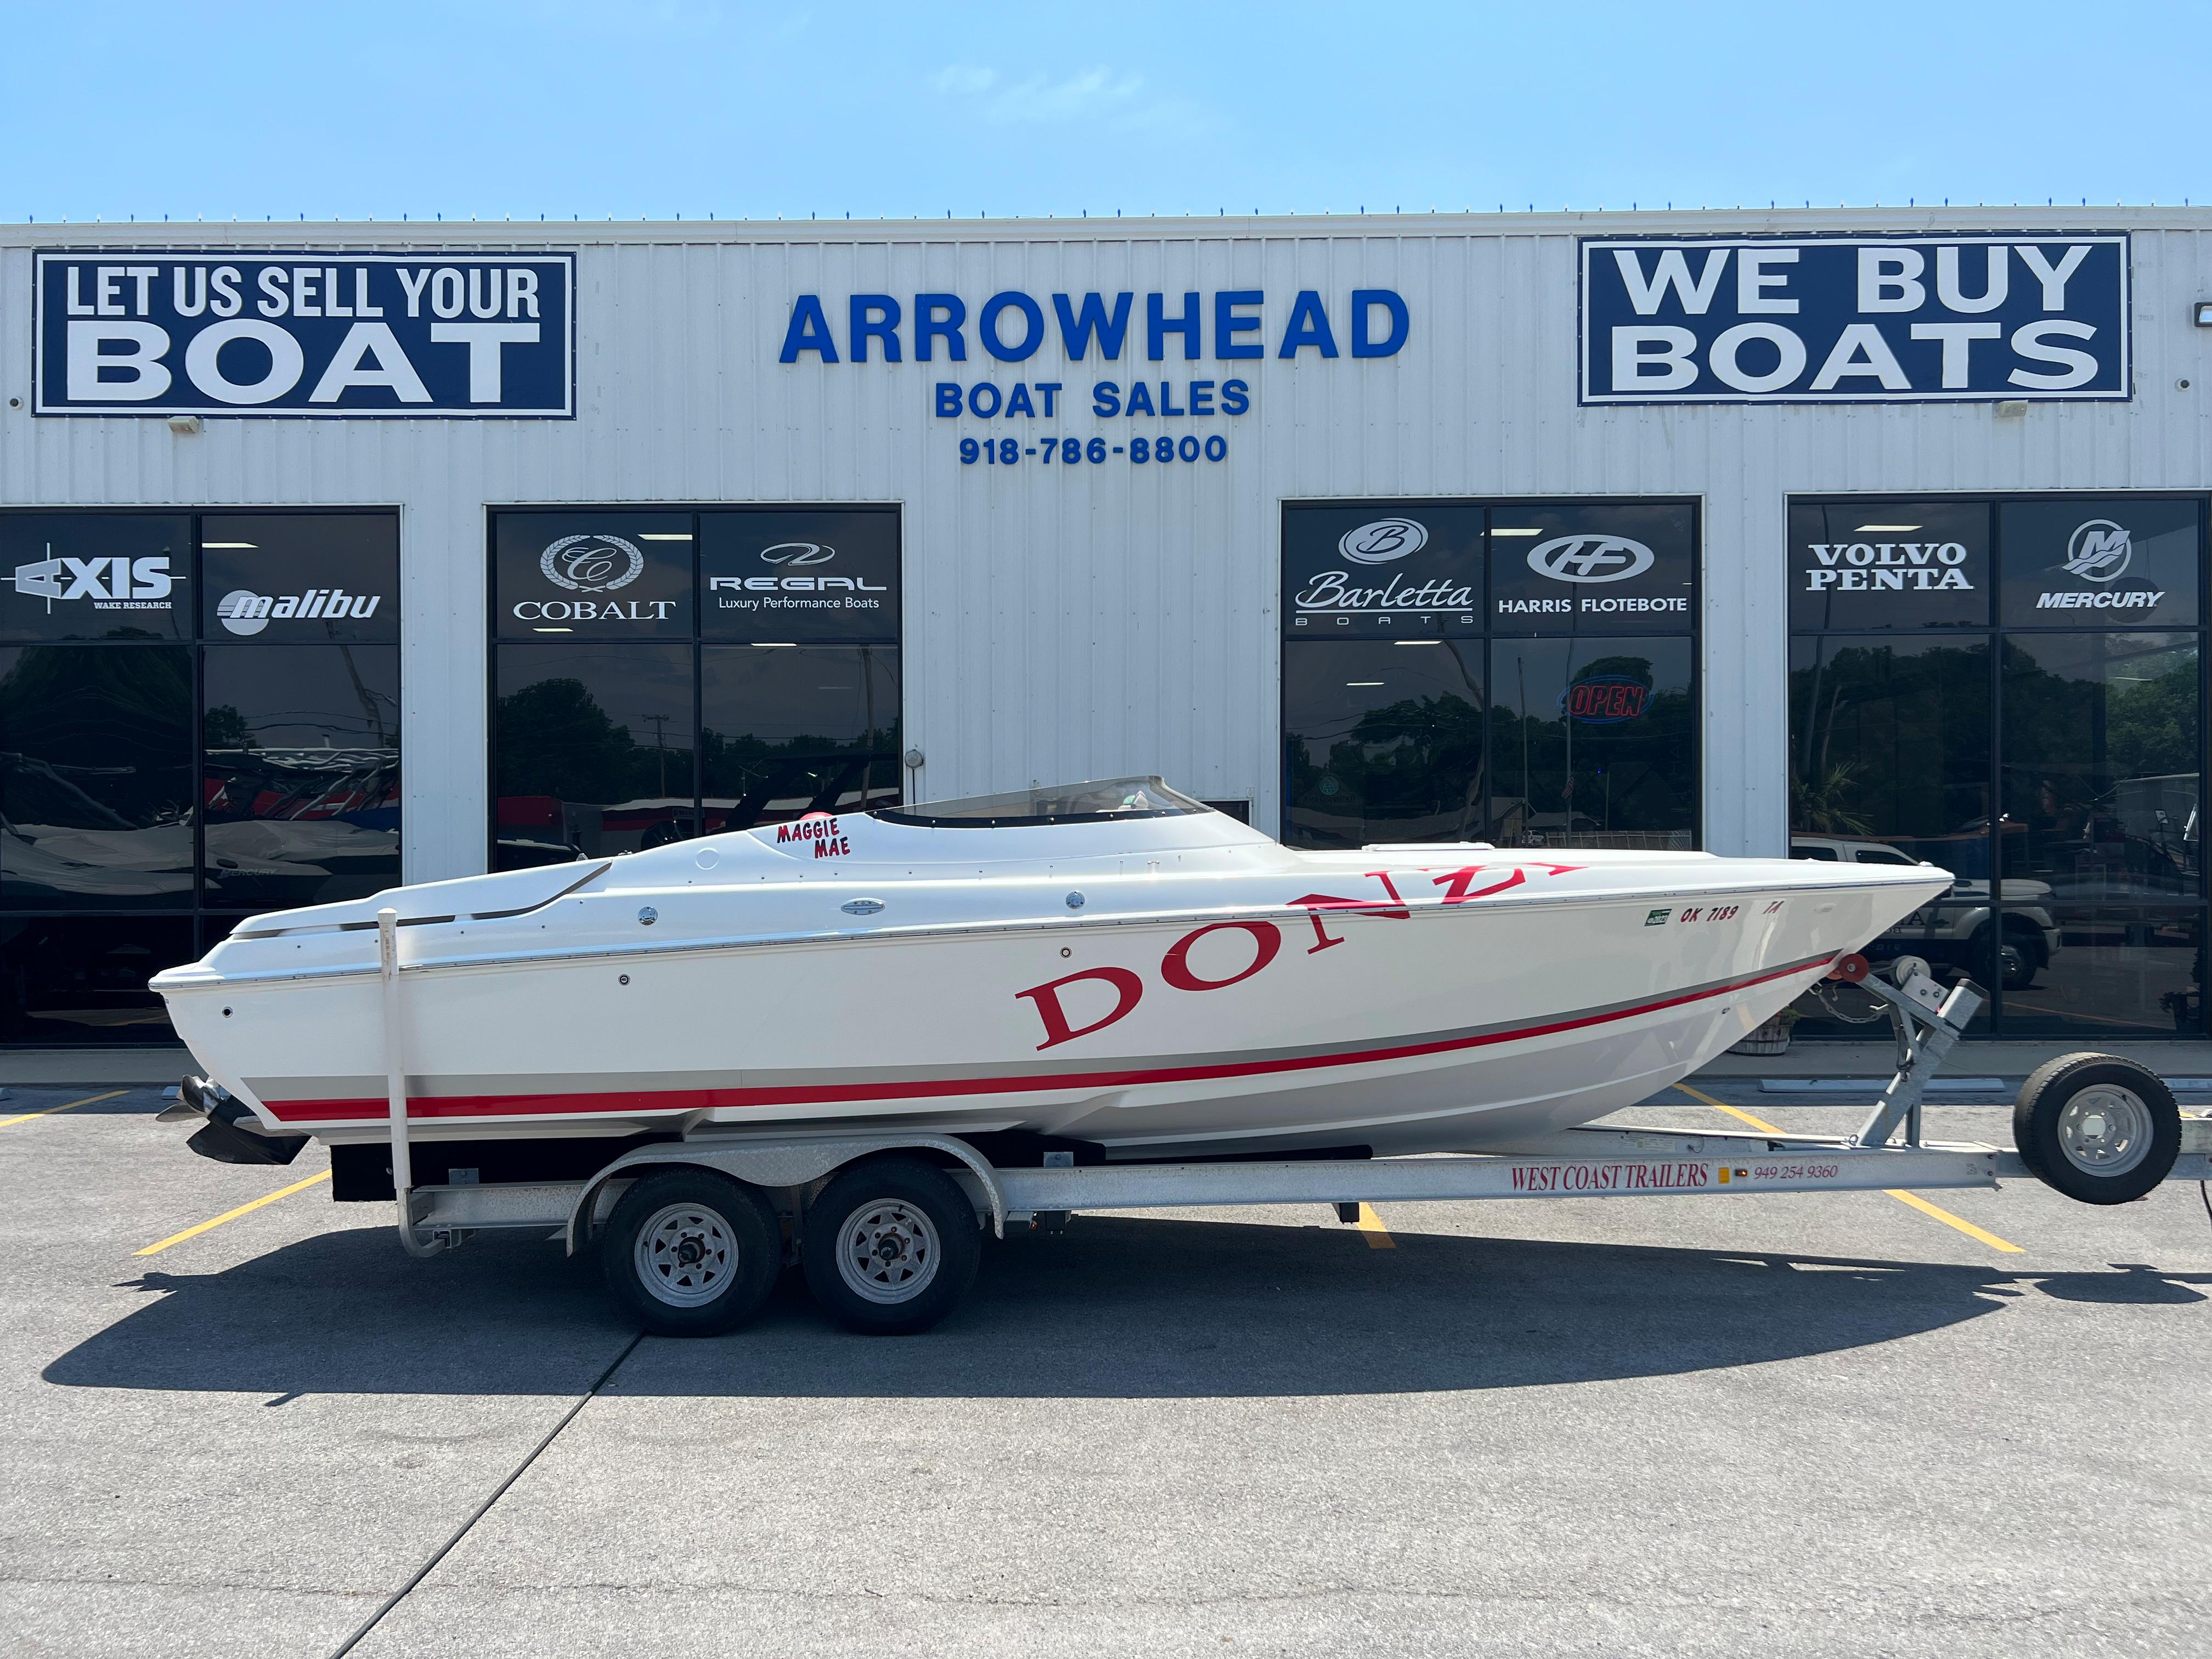 Donzi 26 Zx boats for sale - Boat Trader